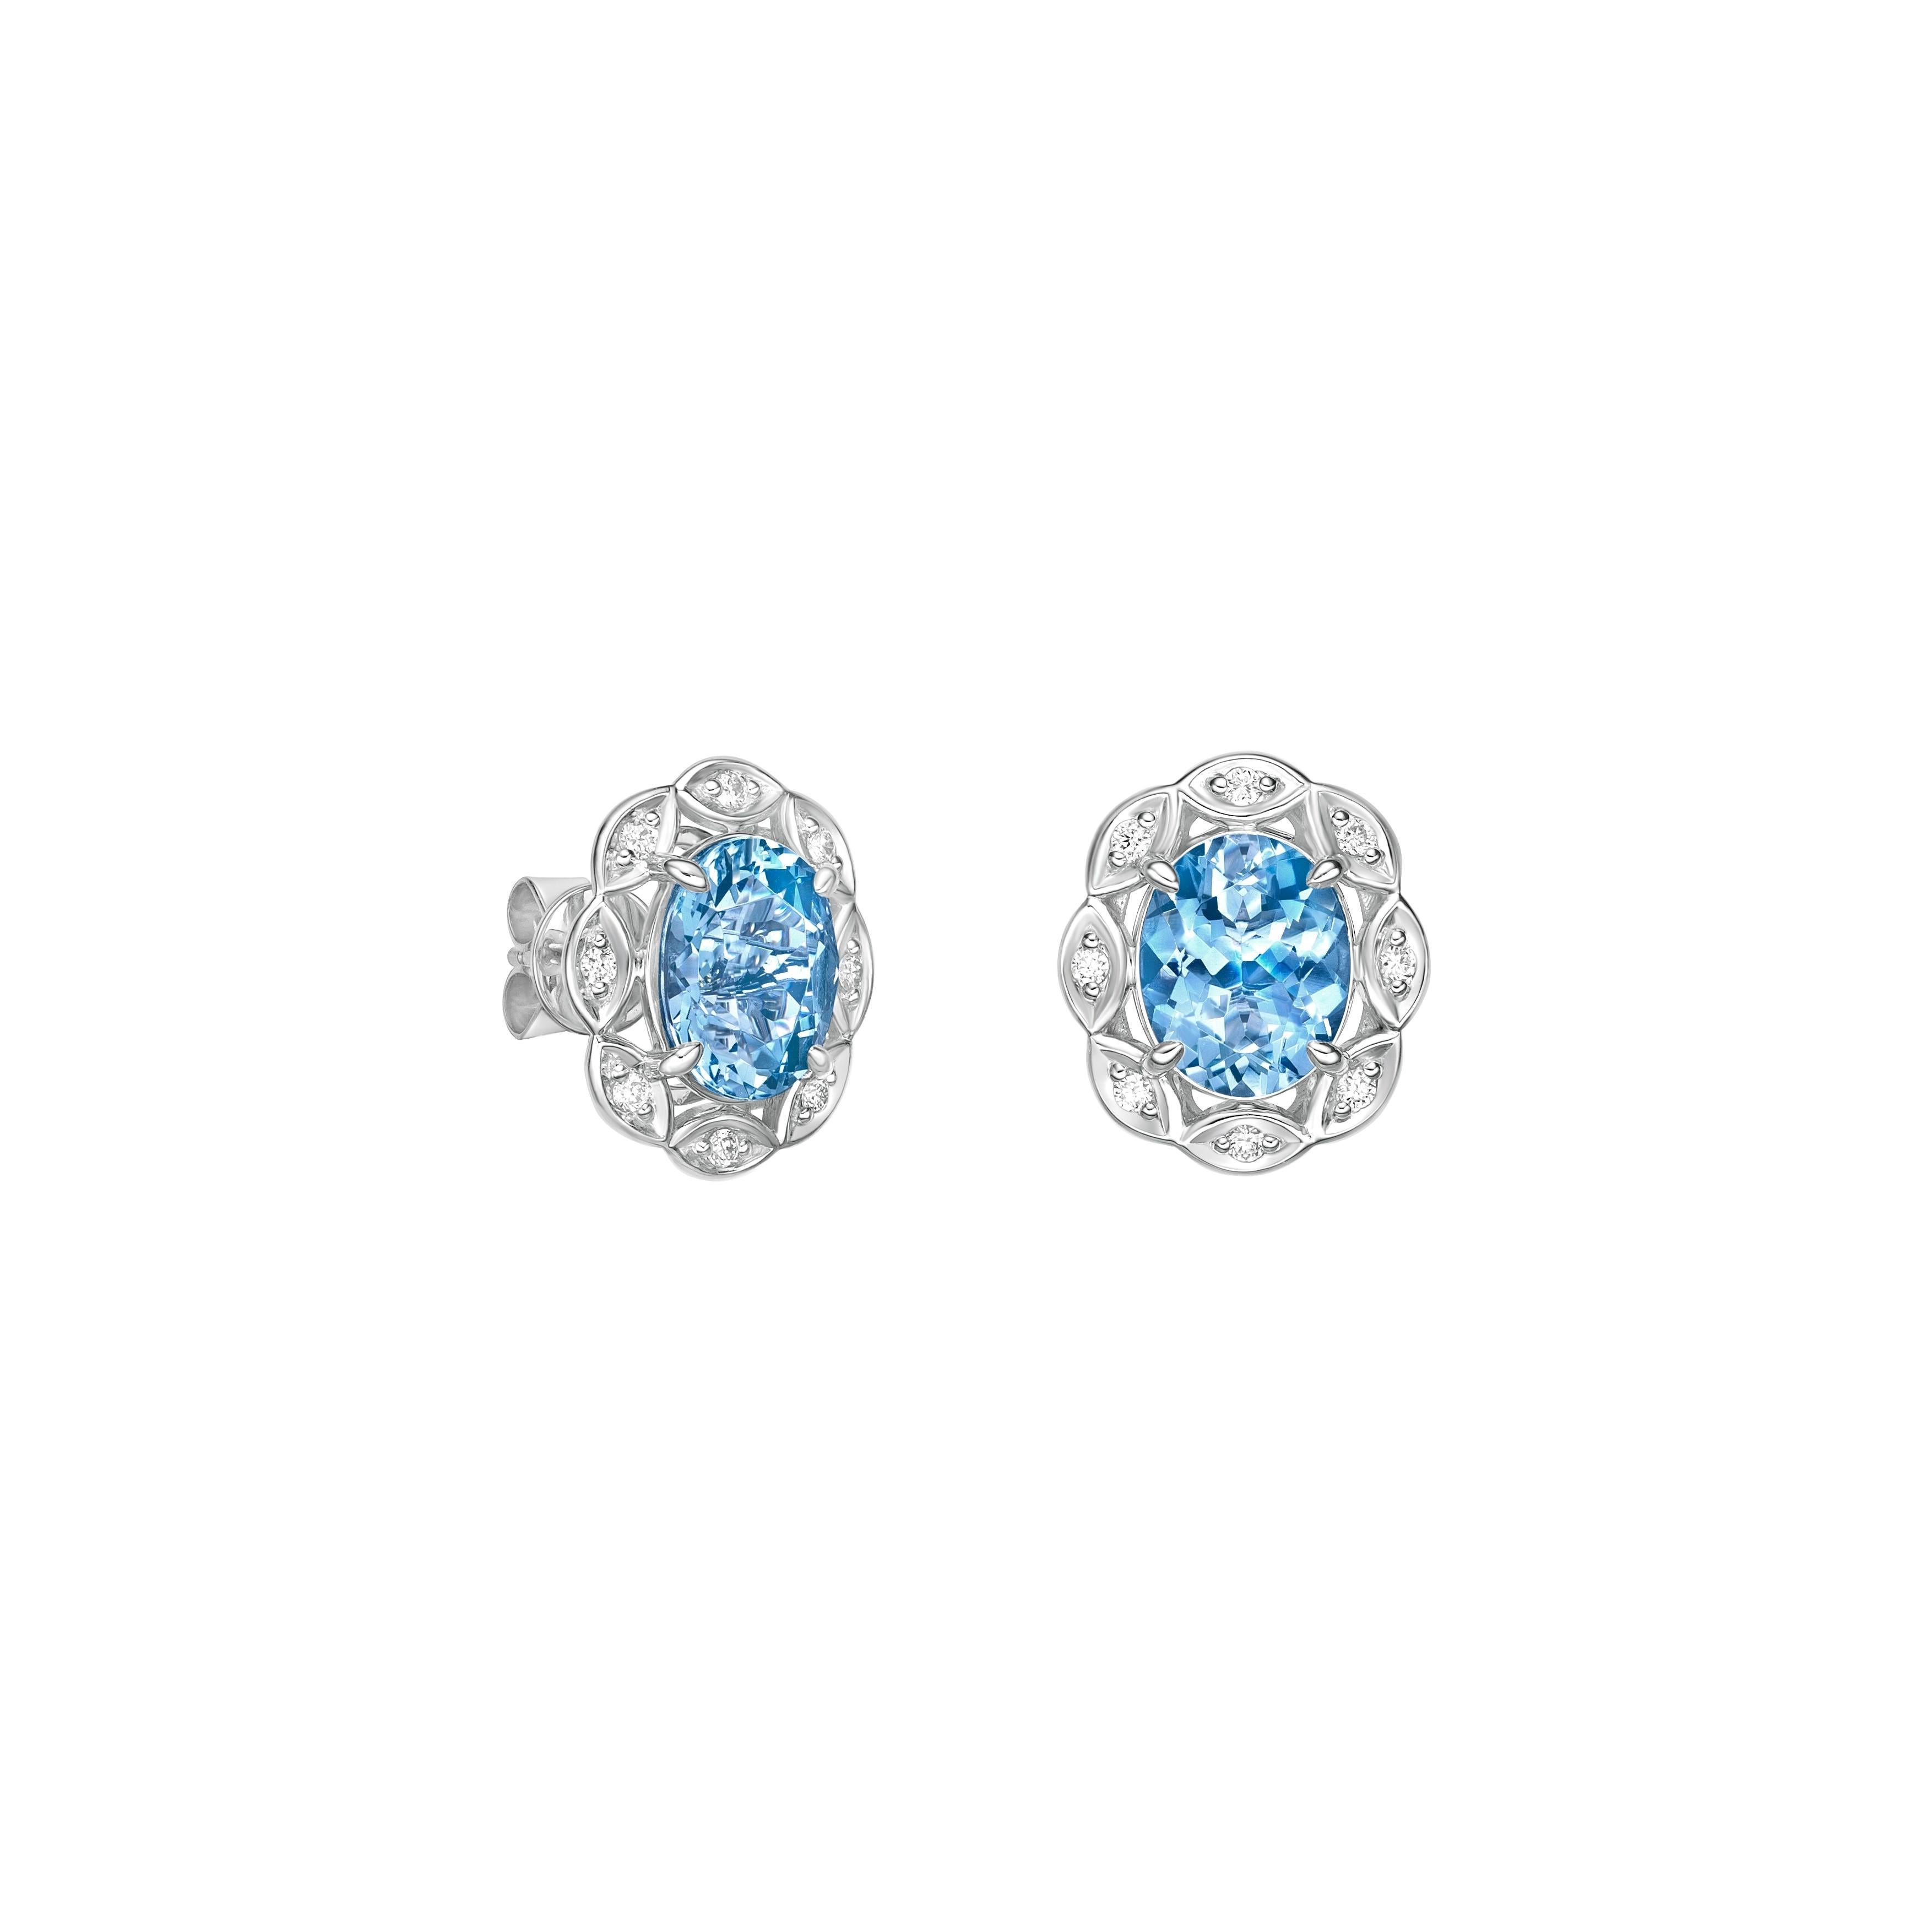 This collection features an array of aquamarines with an icy blue hue that is as cool as it gets! Accented with diamonds these Stud Earrings are made in white gold and present a classic yet elegant look. 

Aquamarine stud Earrings in 18Karat White